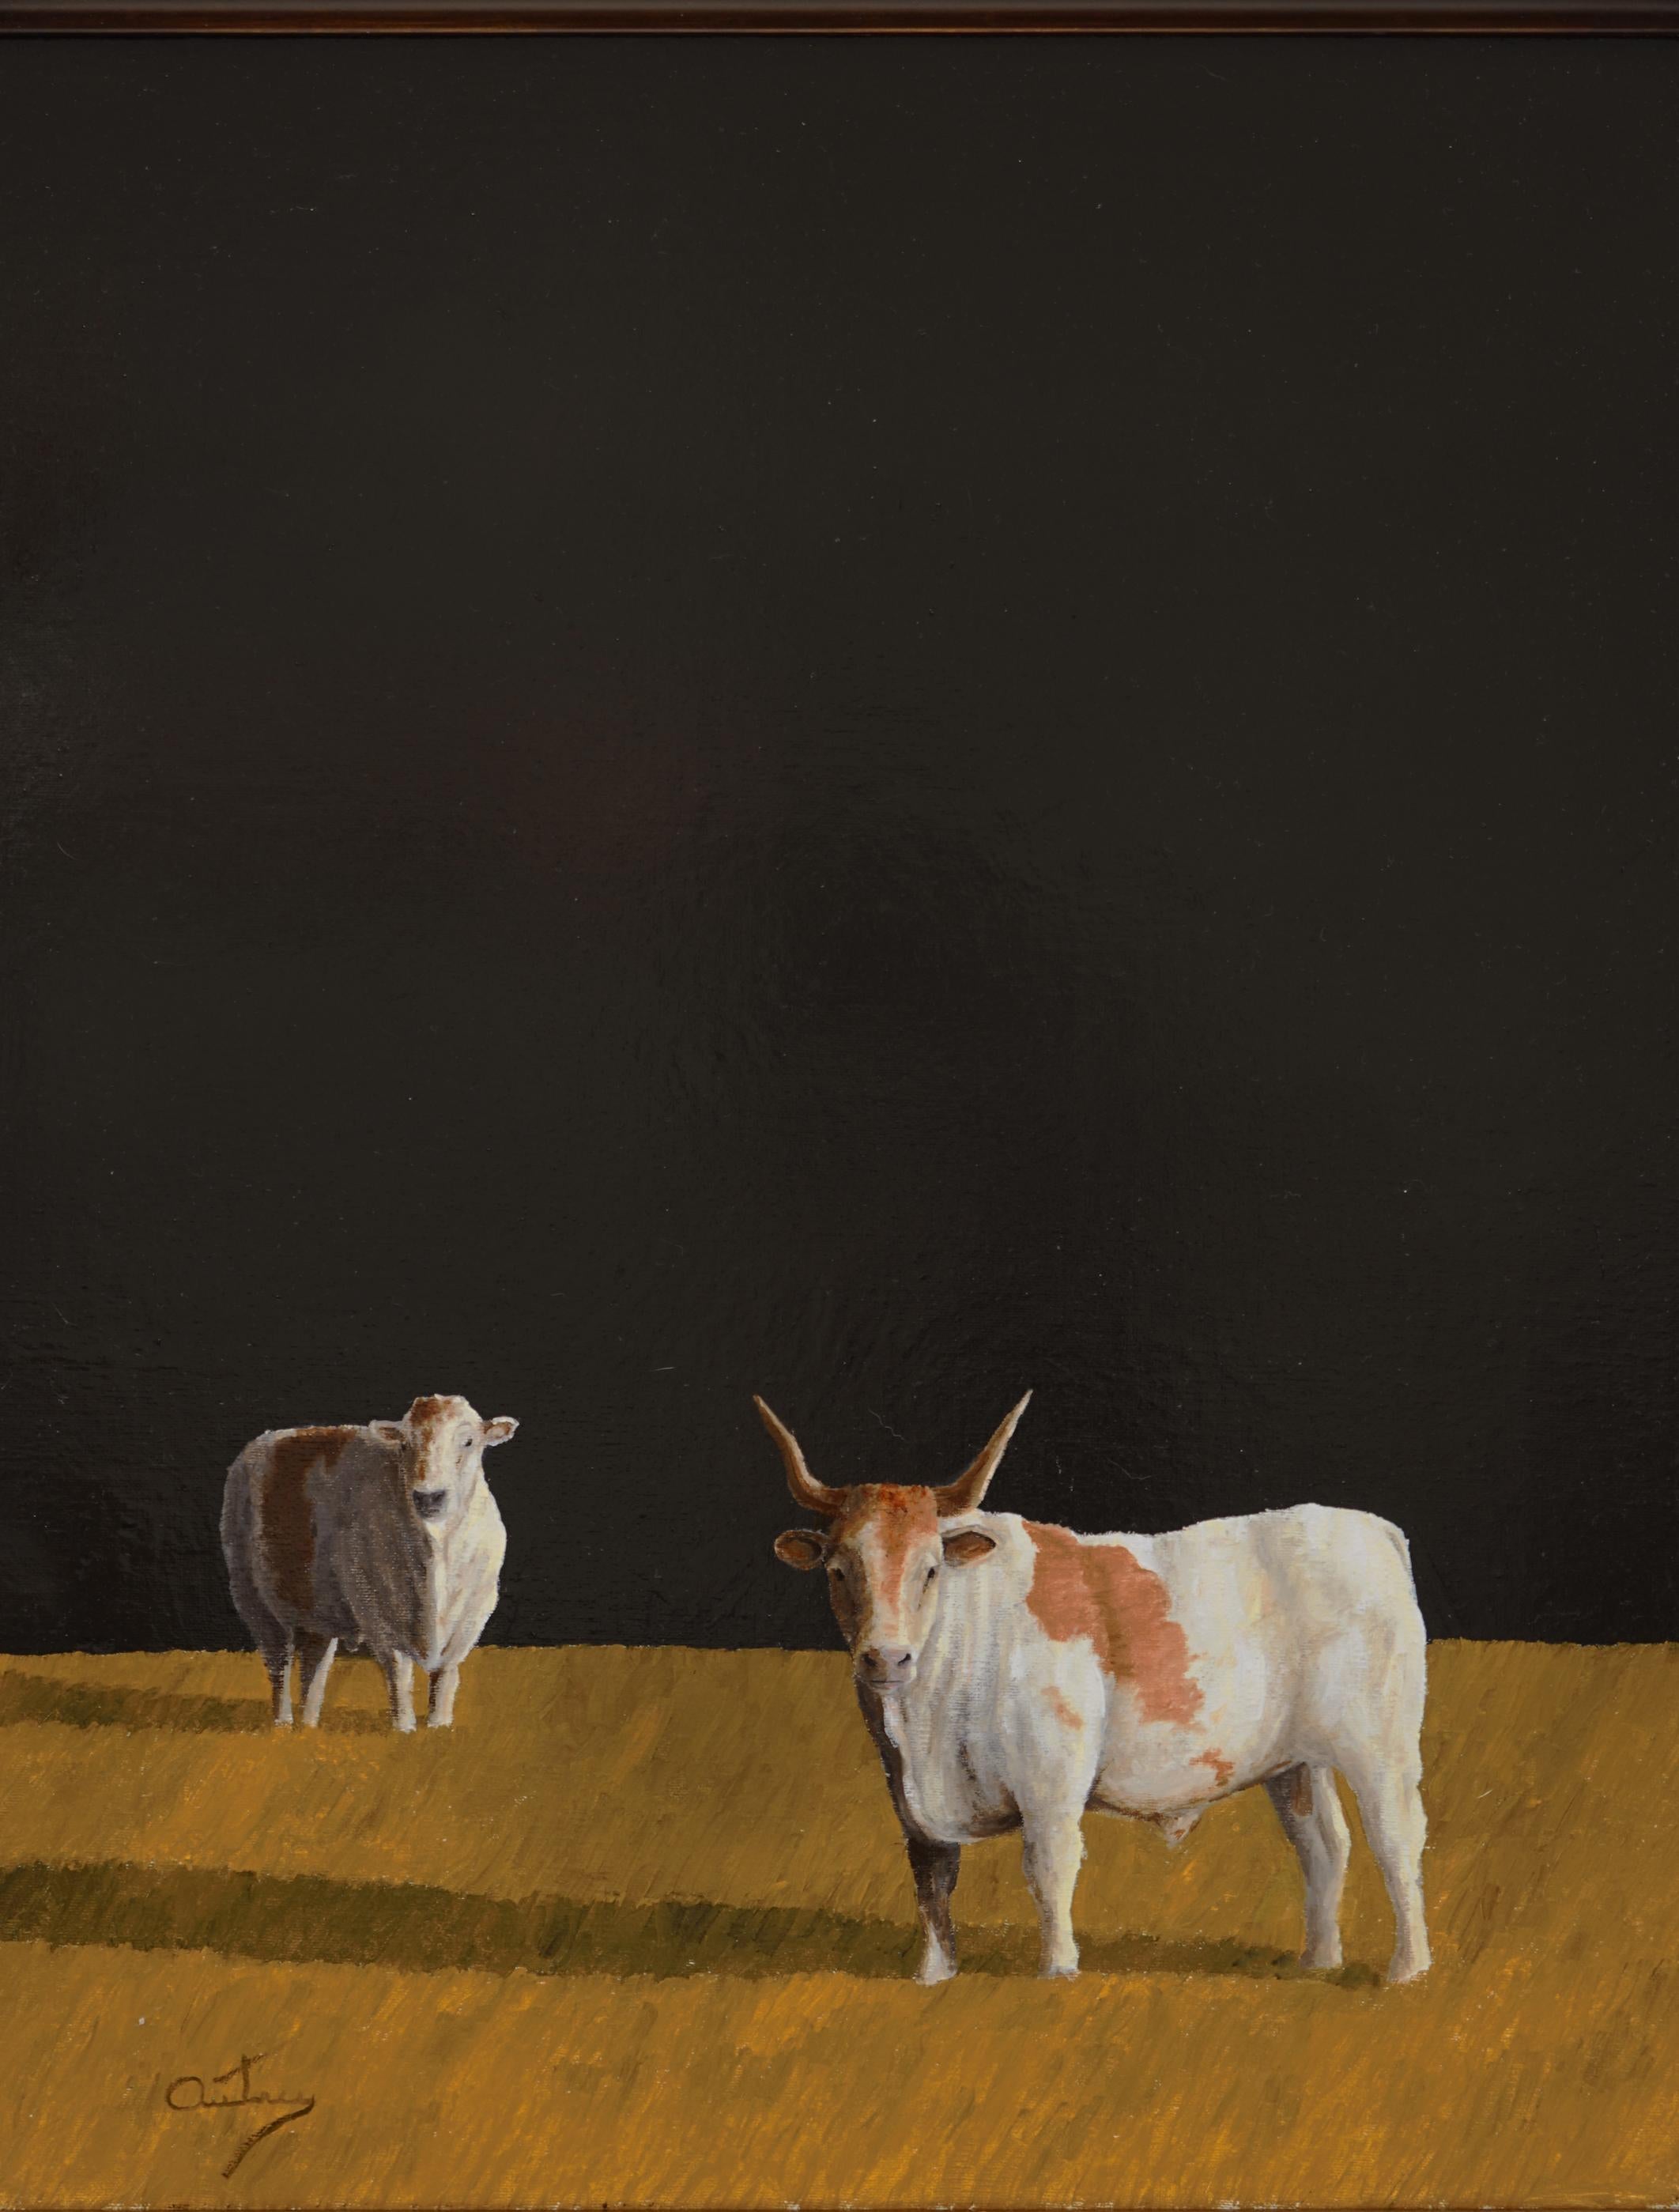 COUPLE  Realist  Light and  Shadow    Sheep Texas Longhorn   Oil on Canvas Frame - American Realist Painting by Luke Autrey